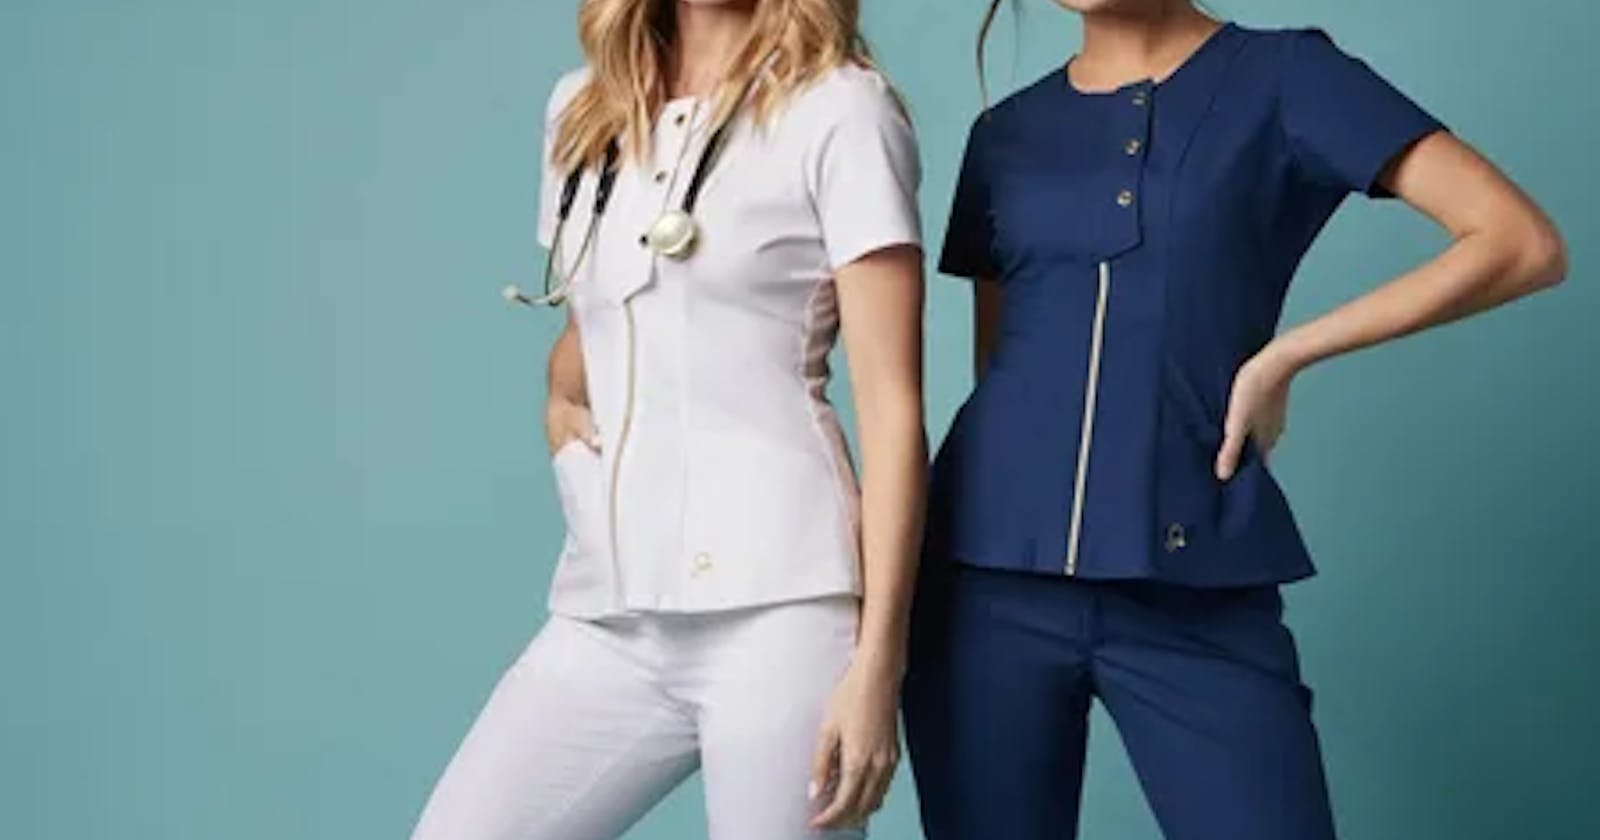 The Ultimate Guide to Nursing Scrubs | Comfort, Style, and Functionality